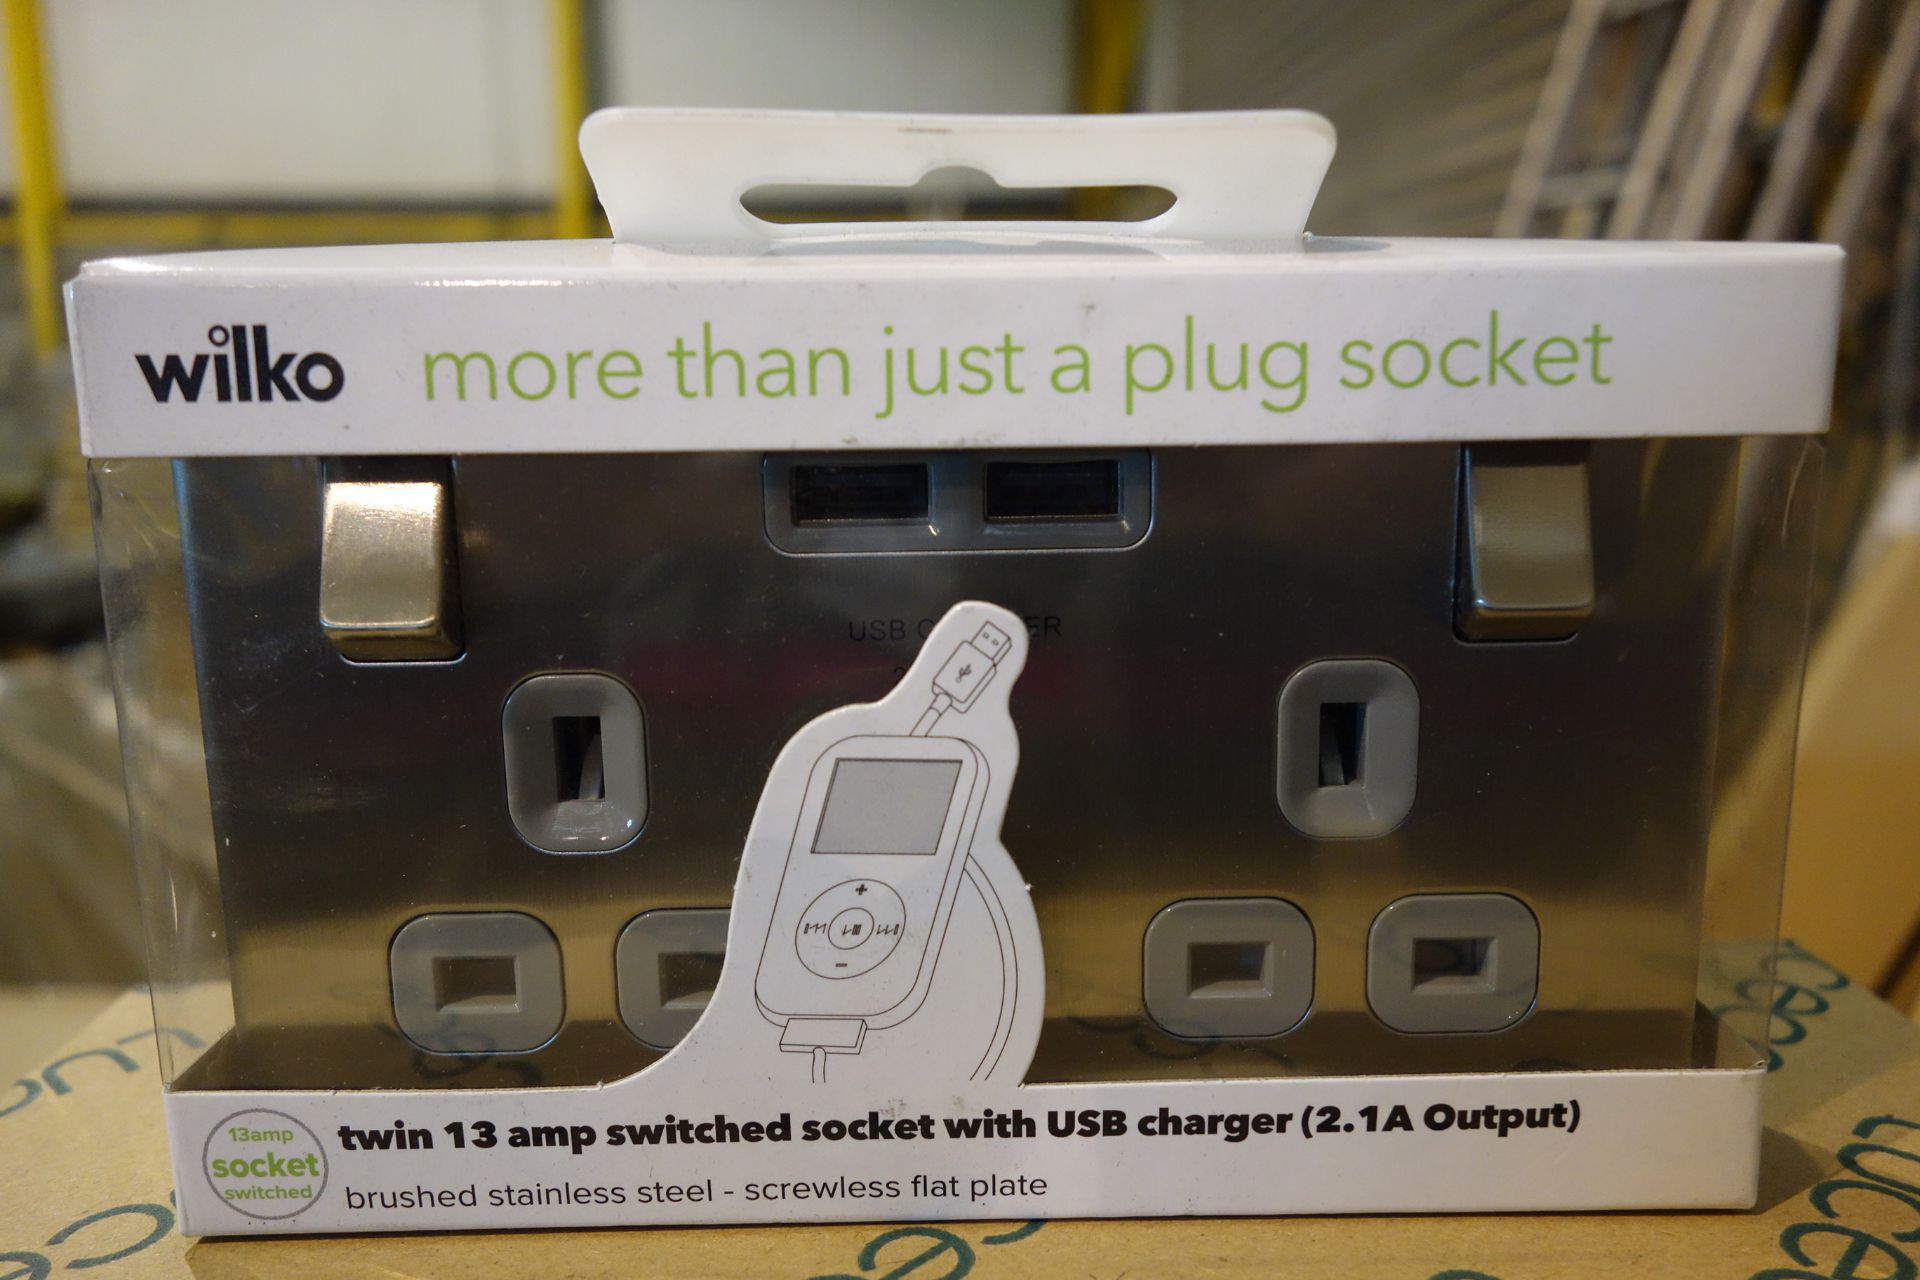 10 X Wilko 13AMP 2G Switched Socket With 2 X USB Charges 2.1A Output Brushed Stainless Steel Grey